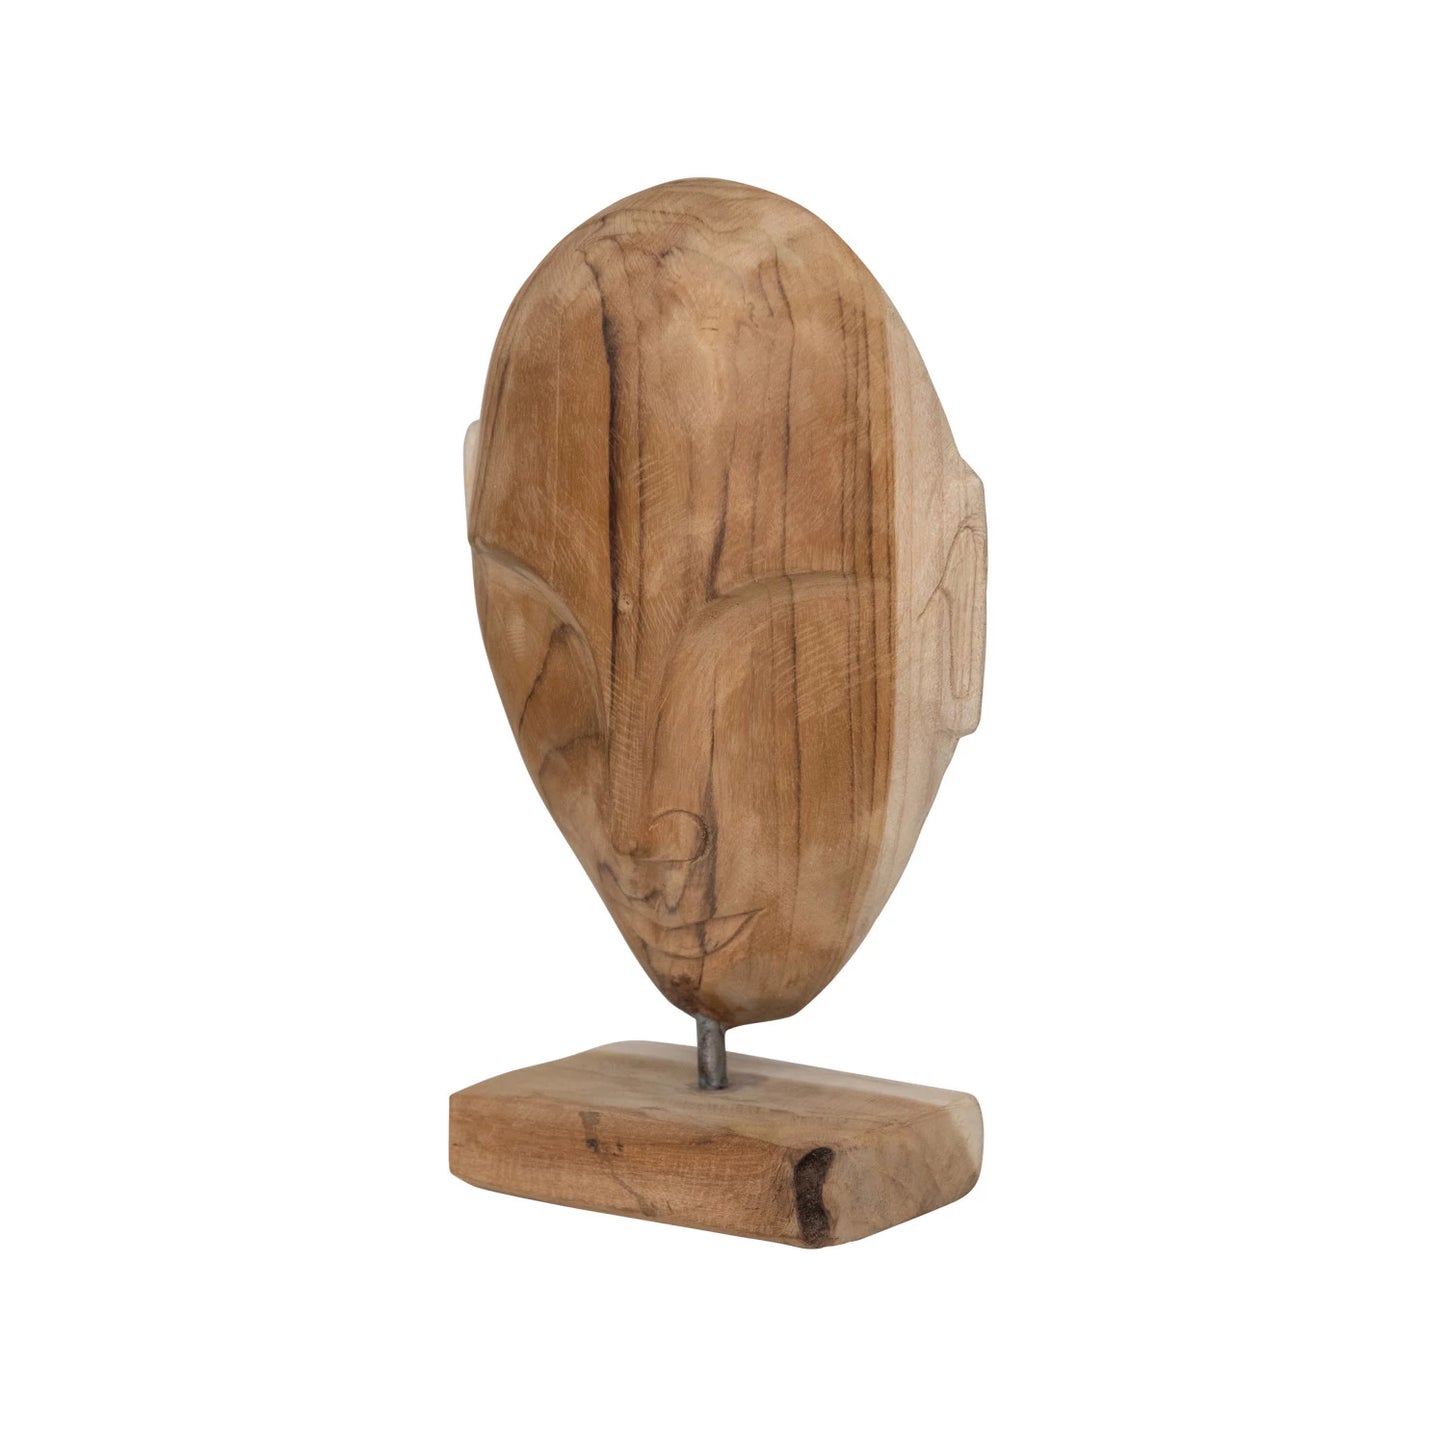 Hand-Carved Teakwood Face - The Fond Home